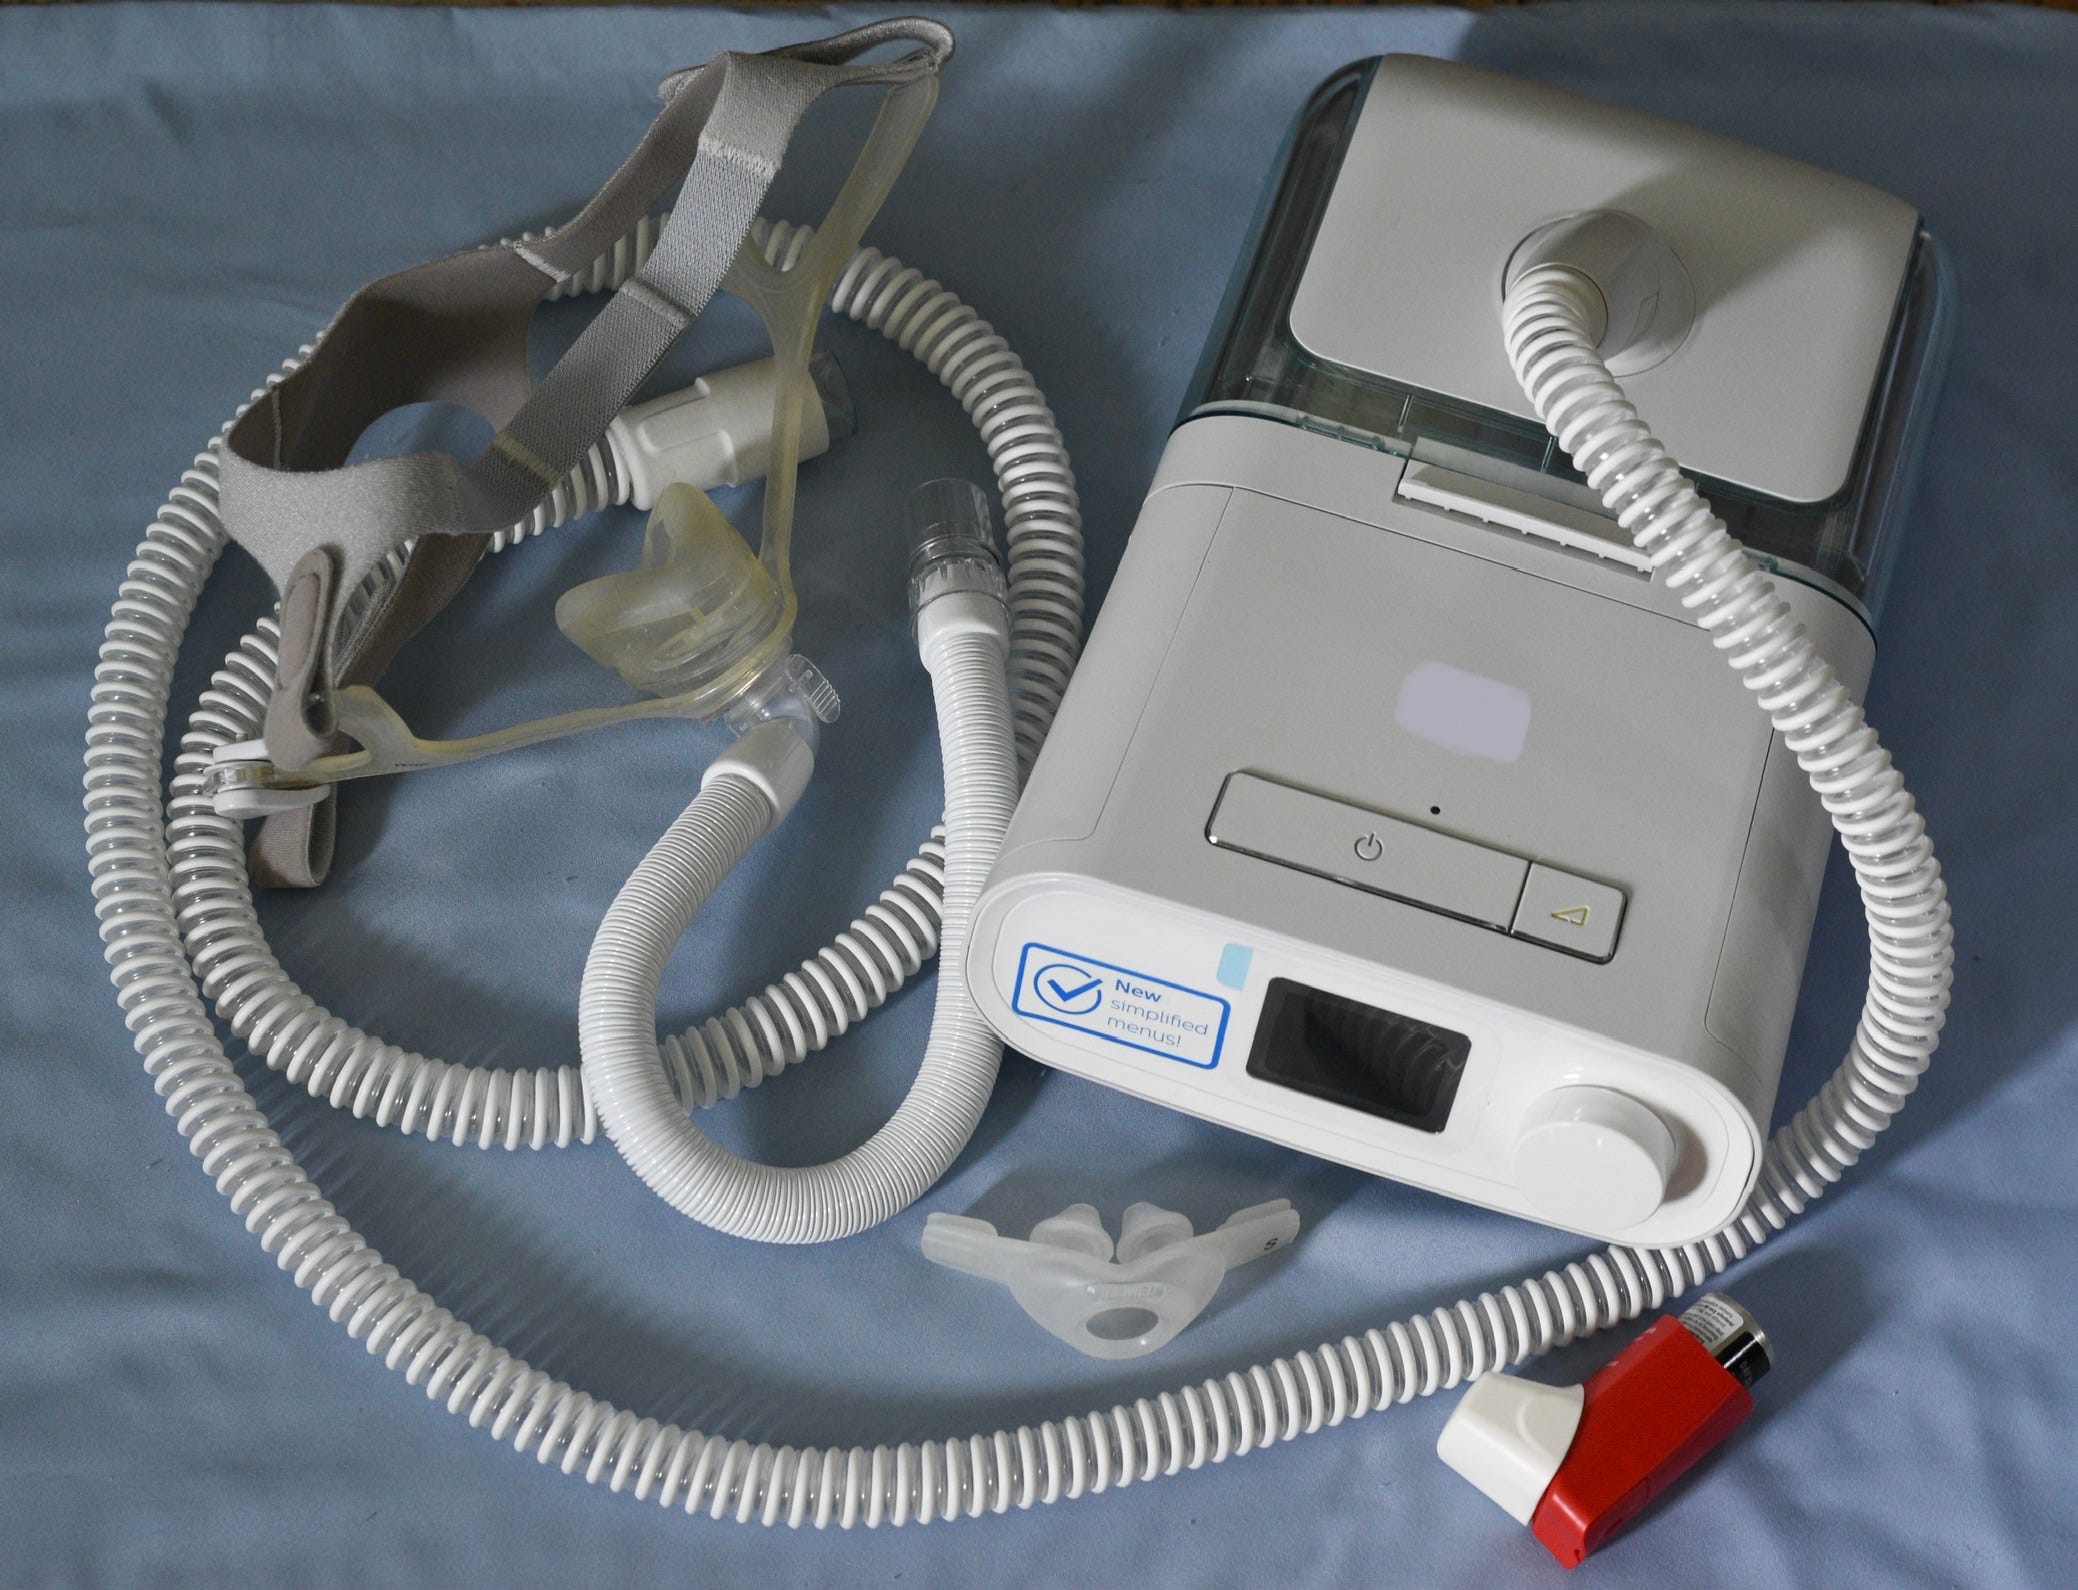 philips agrees to pay $1.1 billion settlement after wide-ranging cpap machine recall